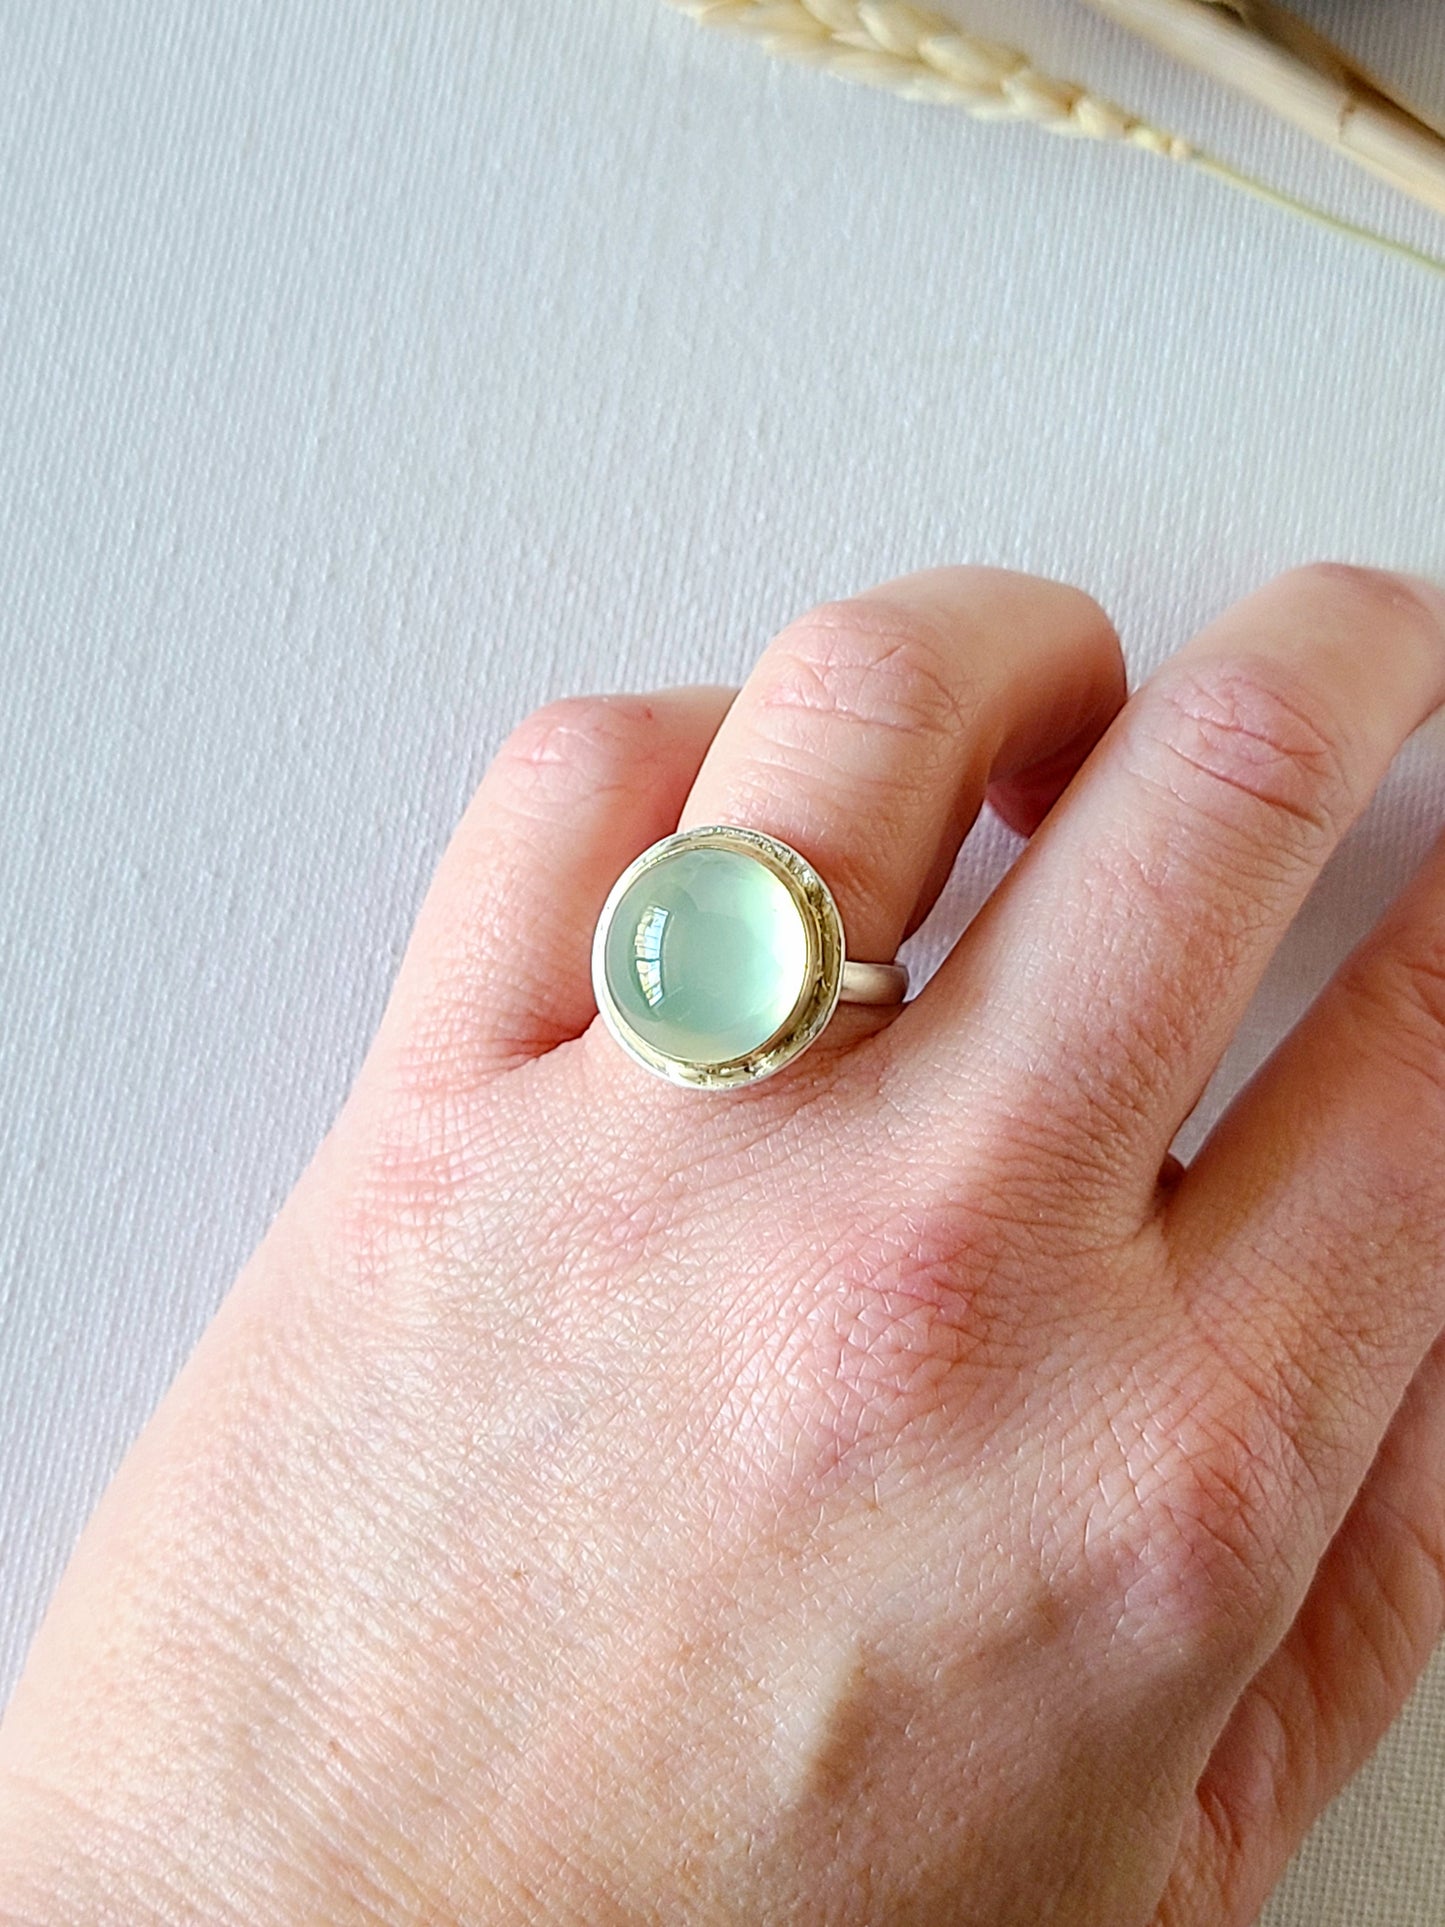 Prehnite high dome round ring-ss/14k size 6.75 US